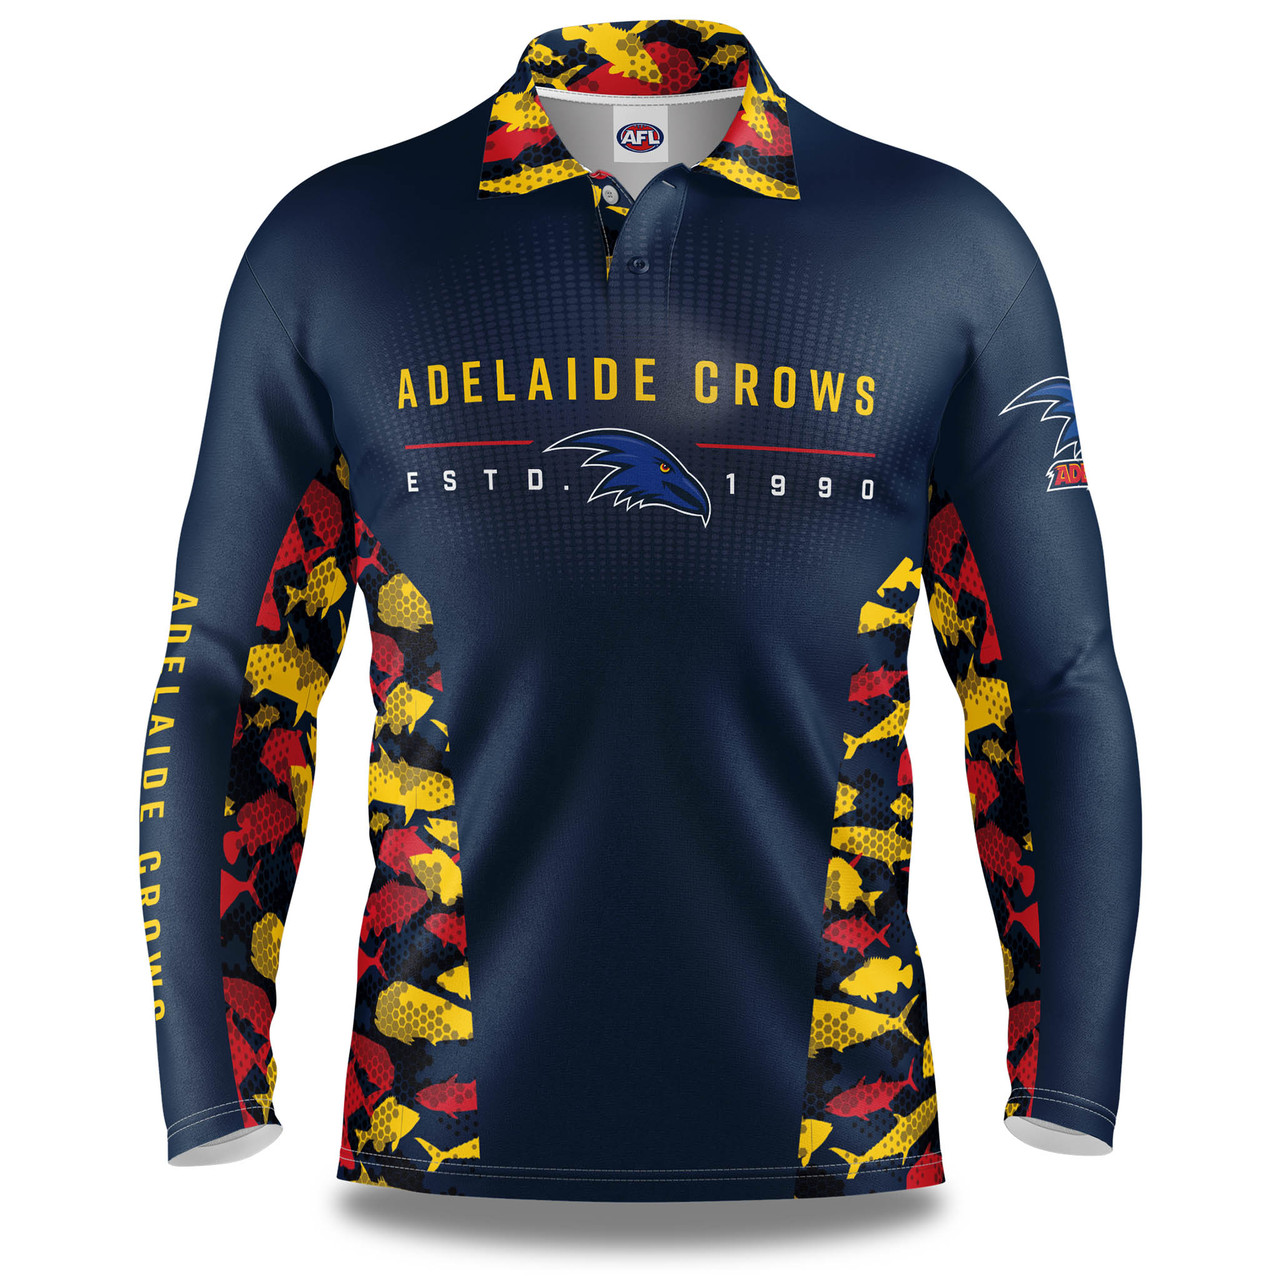 https://cdn11.bigcommerce.com/s-cwgg9akeno/images/stencil/1280x1280/products/633/2224/CLASSIC-FISHINGSHIRT_ADELAIDECROWS_01__75491.1668121382.jpg?c=1